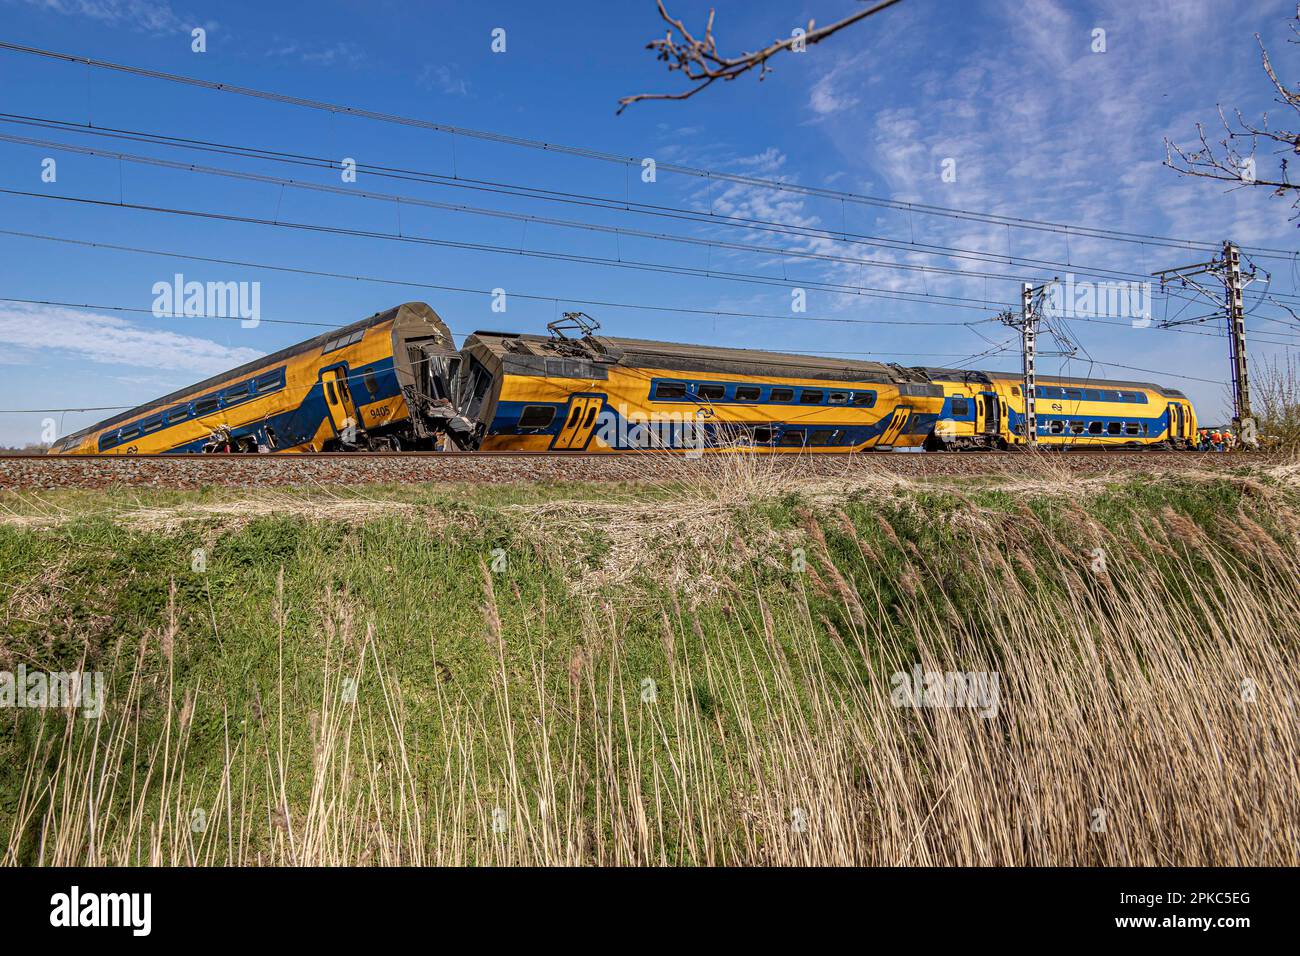 Voorschoten, Netherlands. 04th Apr, 2023. A damaged train seen on the rails over the canal. A train collided with heavy construction equipment and derailment of the carriages near Leiden and the Hague. The Dutch railway crash resulted deadly, killing one person and injuring 30. Emergency services workers and police were on the scene to assess the damage. The accident took place in Voorschoten in the Netherlands. (Photo by Nik Oiko/SOPA Images/Sipa USA) Credit: Sipa USA/Alamy Live News Stock Photo